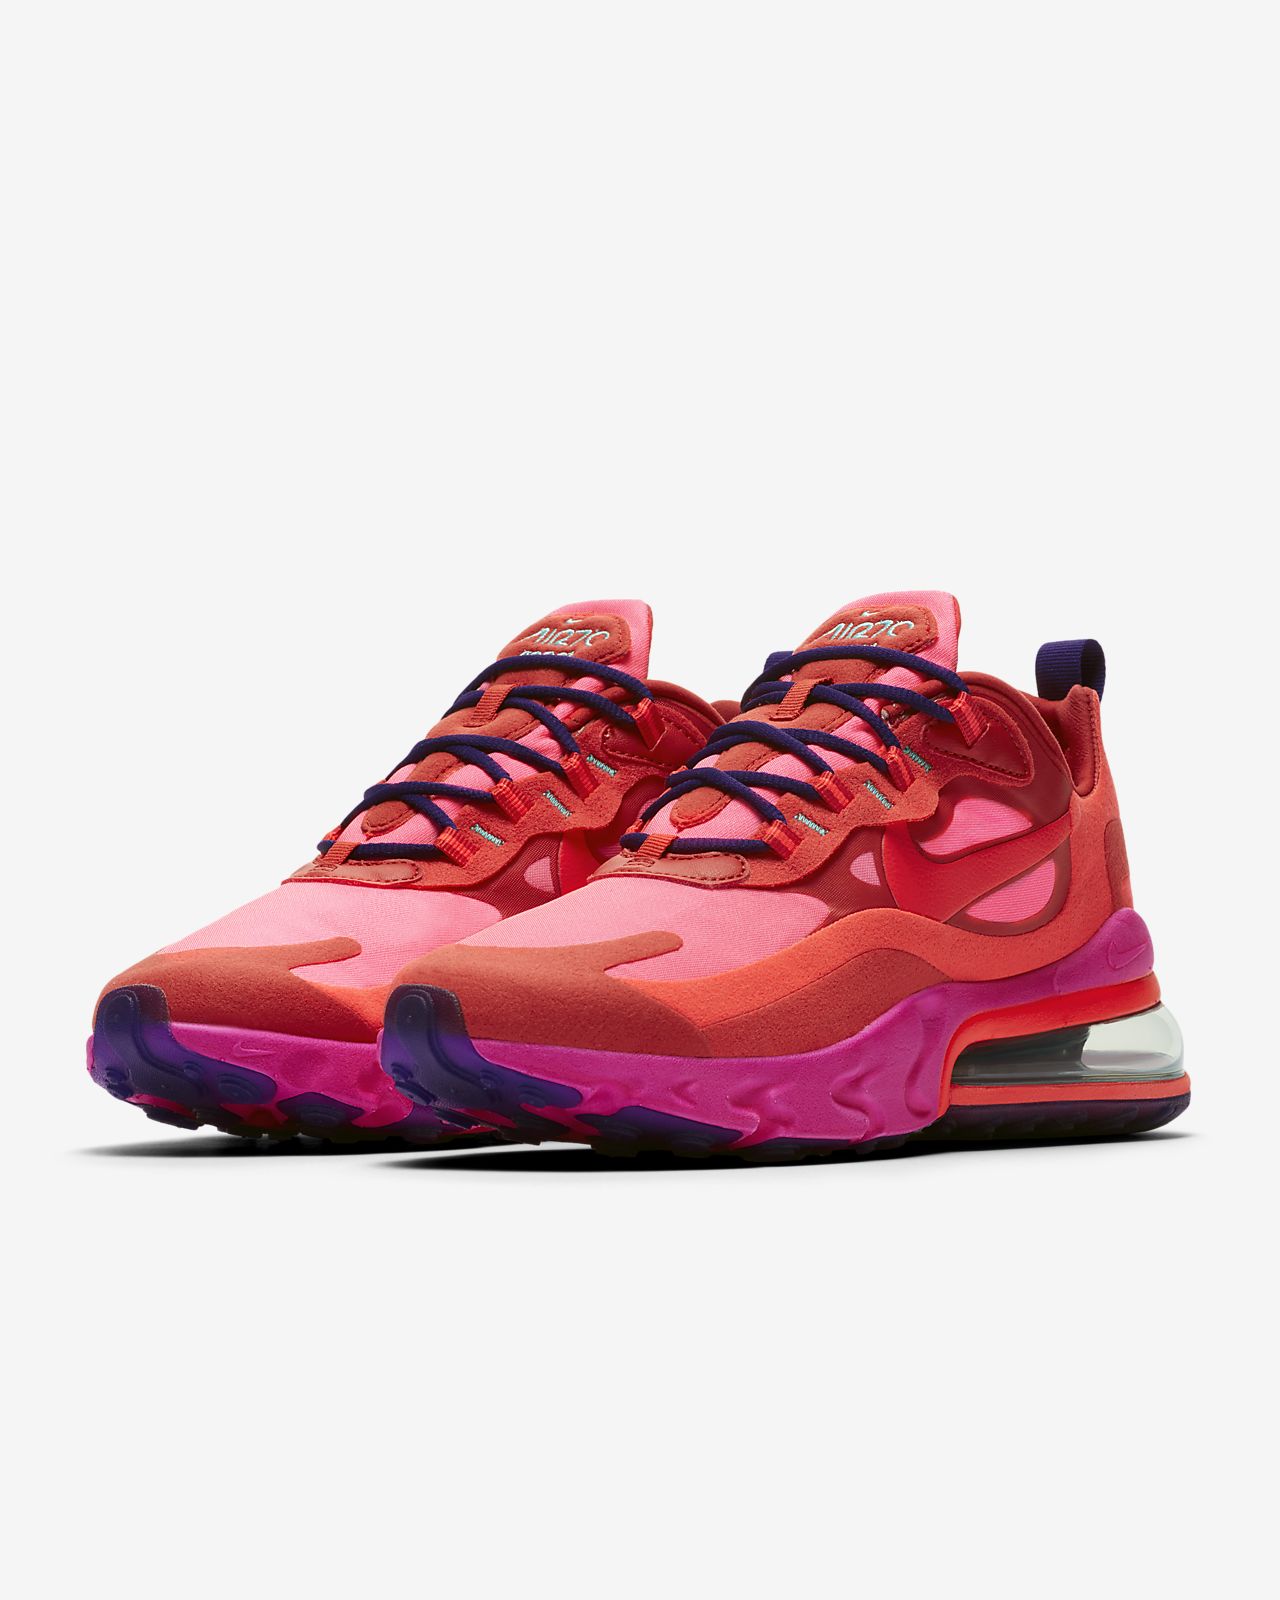 nike women's shoes pink and orange